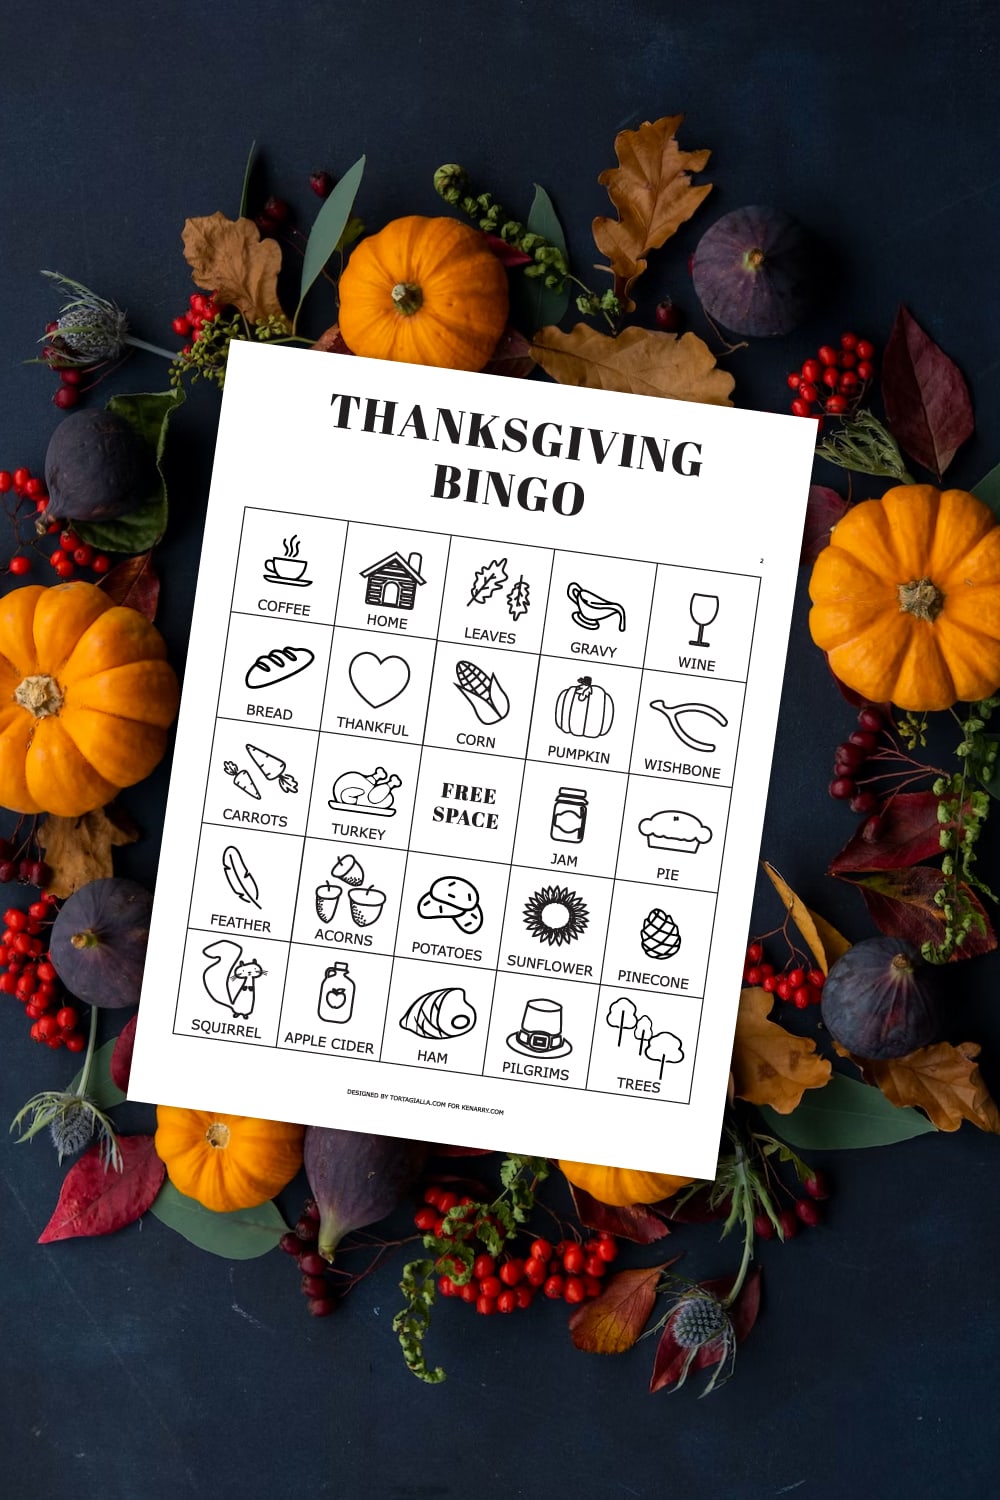 Preview of printable bingo pages with Thanksgiving icons on top of a dark background with a circular wreath made of pumpkins, figs and various leaves and berries.